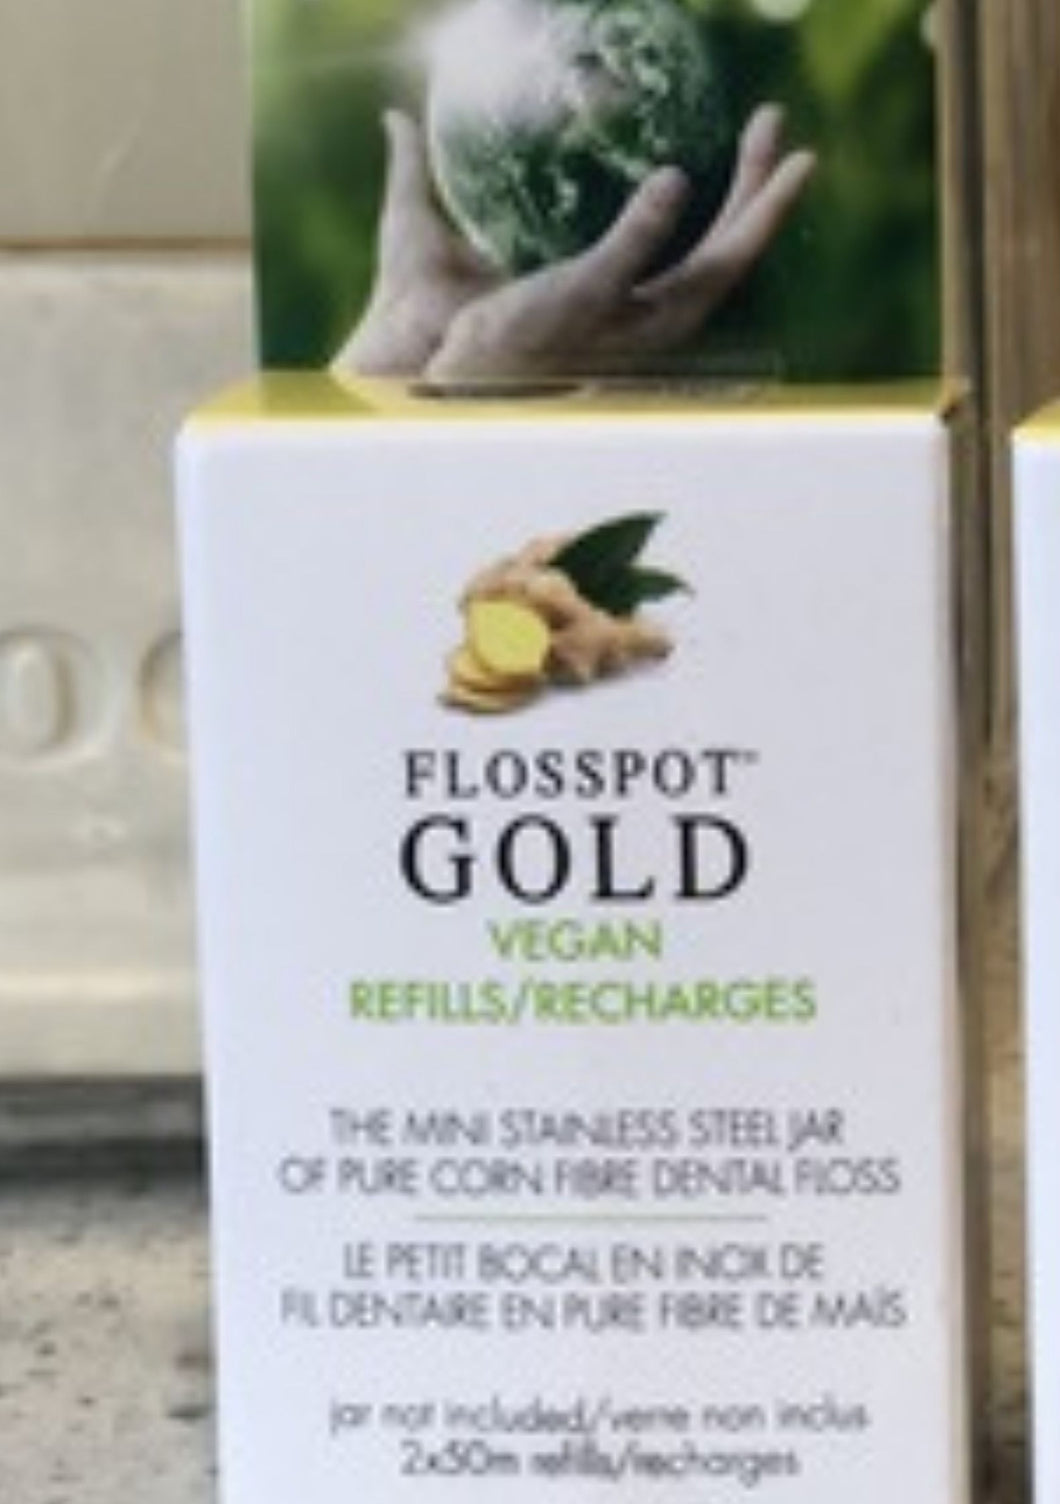 The plant-sourced PLA floss Flosspot Gold is coated with candelilla wax, flavoured with ginger-mint and packaged with a durable refillable stainless steel jar. Non-toxic stainless is a perfect zero waste refillable container for this vegan-friendly floss.  $16.00